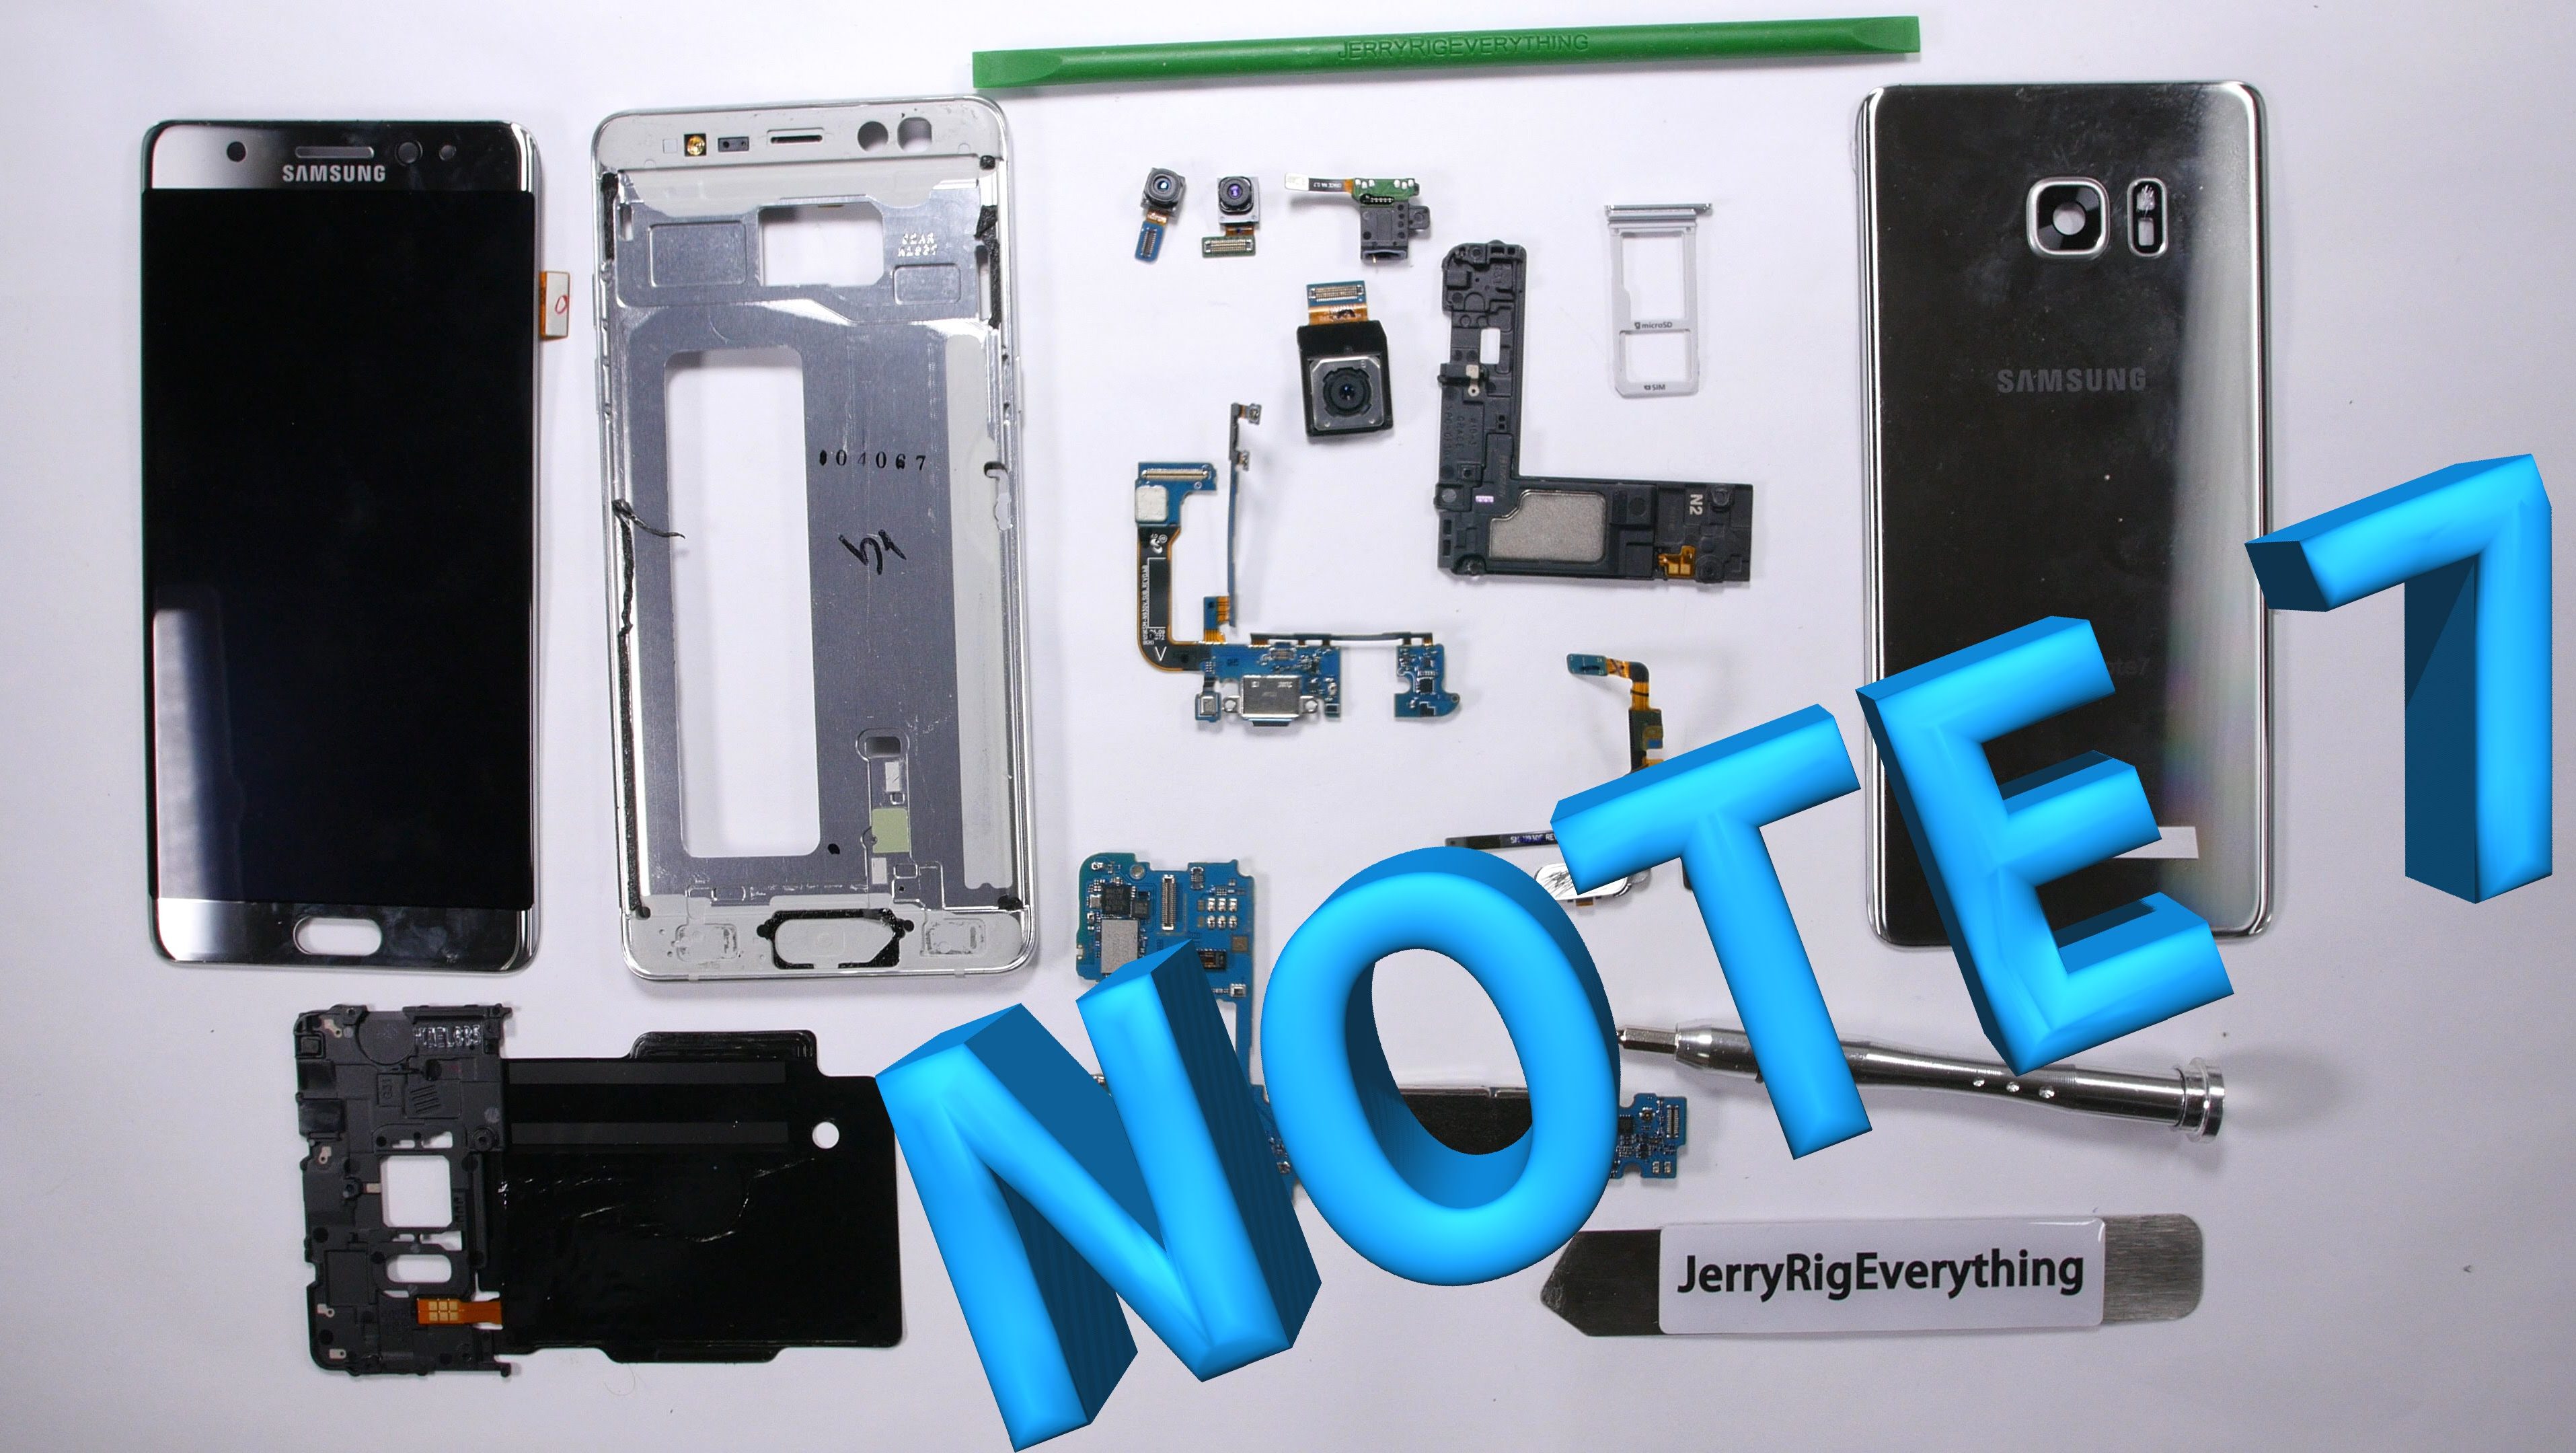 Galaxy note ремонт. Samsung Note 7 Battery. Galaxy s7 Edge Disassembly. Samsung Note 10 Charging Port. Galaxy Note 7 Block Charging.